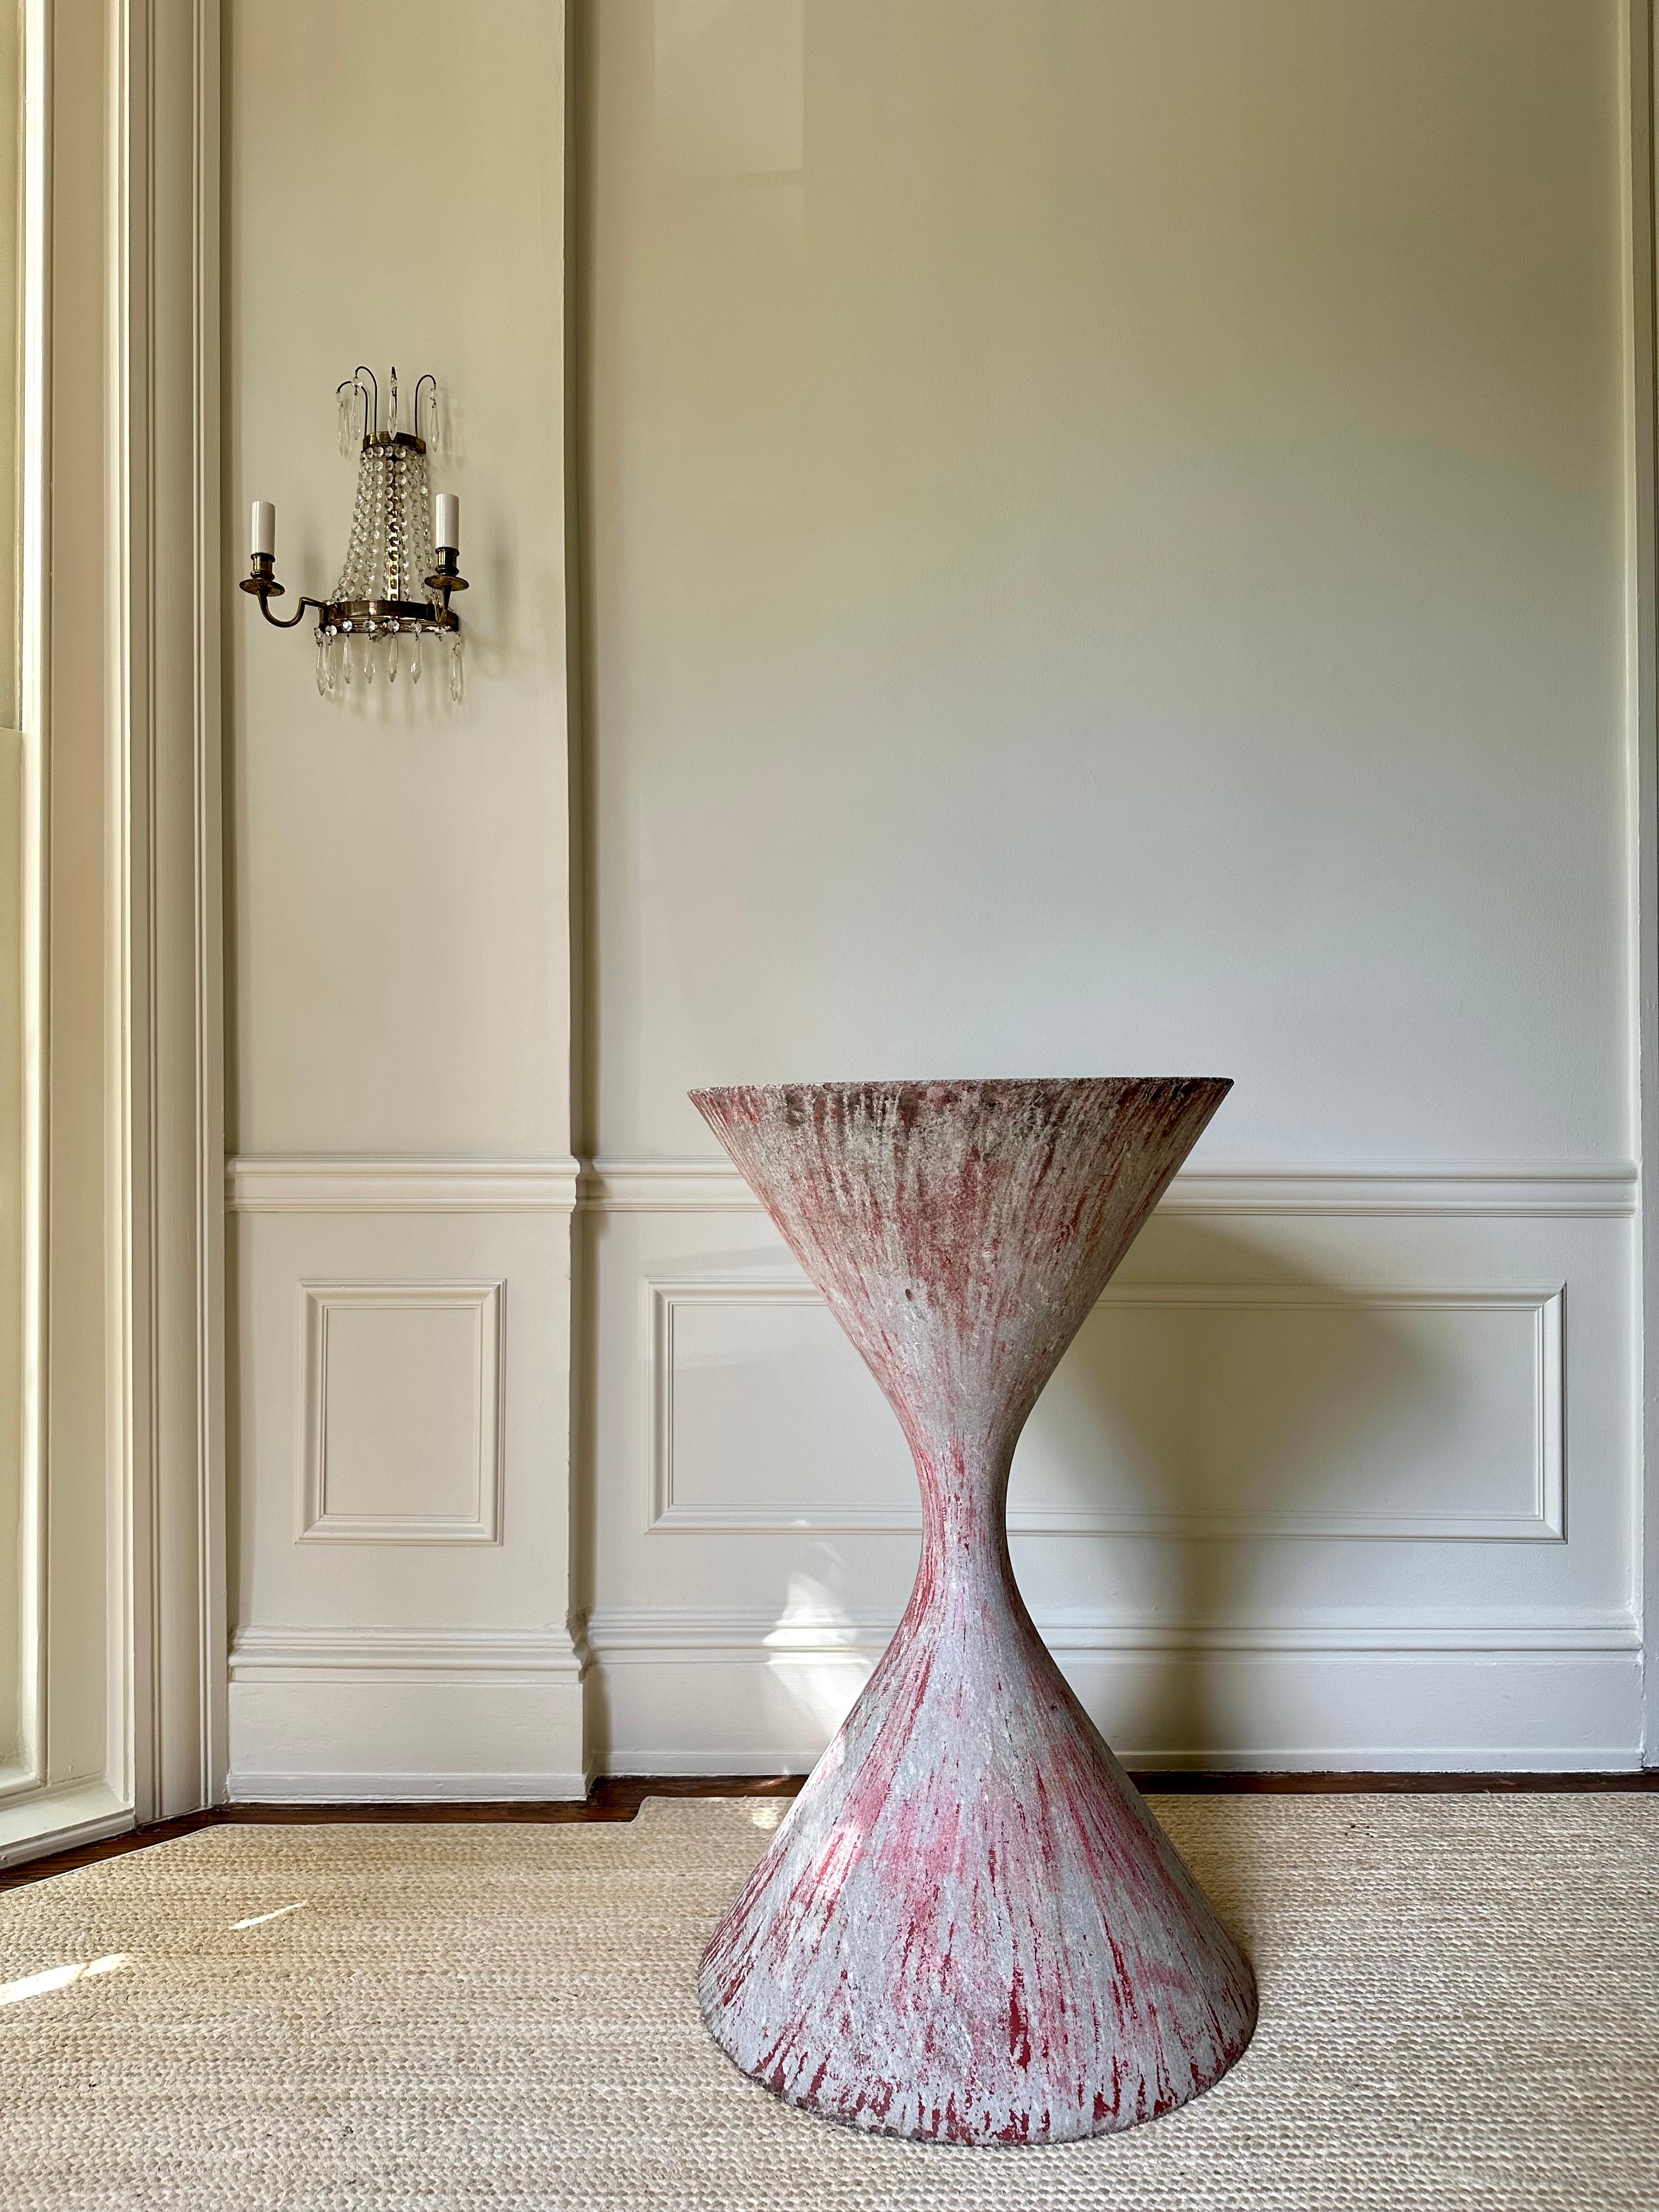 An iconic 'Spindel’ Planter by Swiss Architect Willy Guhl for Eternit. This lovely planter with decades of European patina sourced from a French estate is equally beautiful indoors or out as a stand alone sculpture. I love this piece’s beautiful